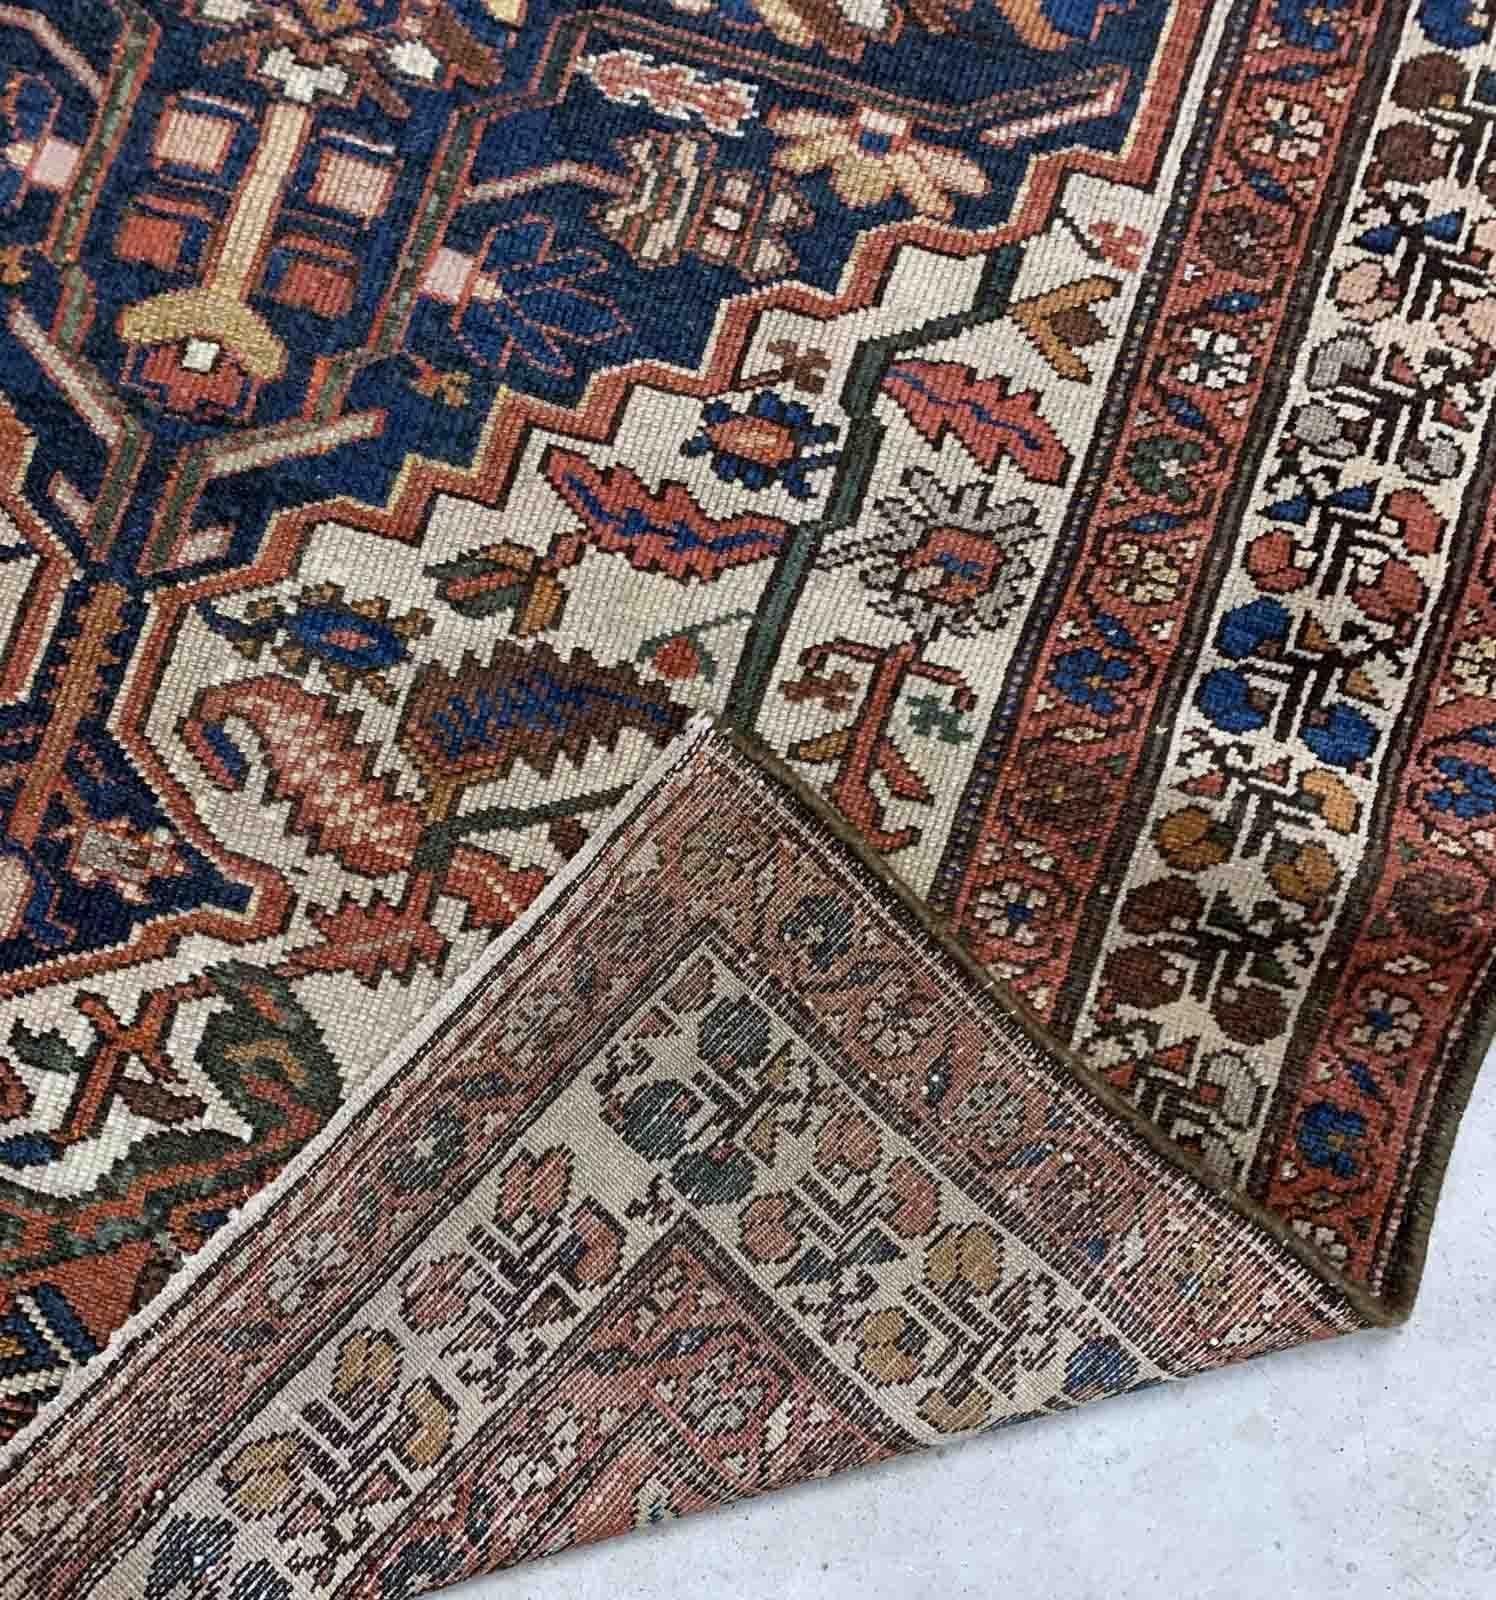 Handmade antique Middle Eastern Malayer rug in traditional design. The rug is from the beginning of 20th century in original good condition.

-condition: original good,

-circa: 1920s,

-size: 4.1' x 6.2' (125cm x 189cm),
?
-material: